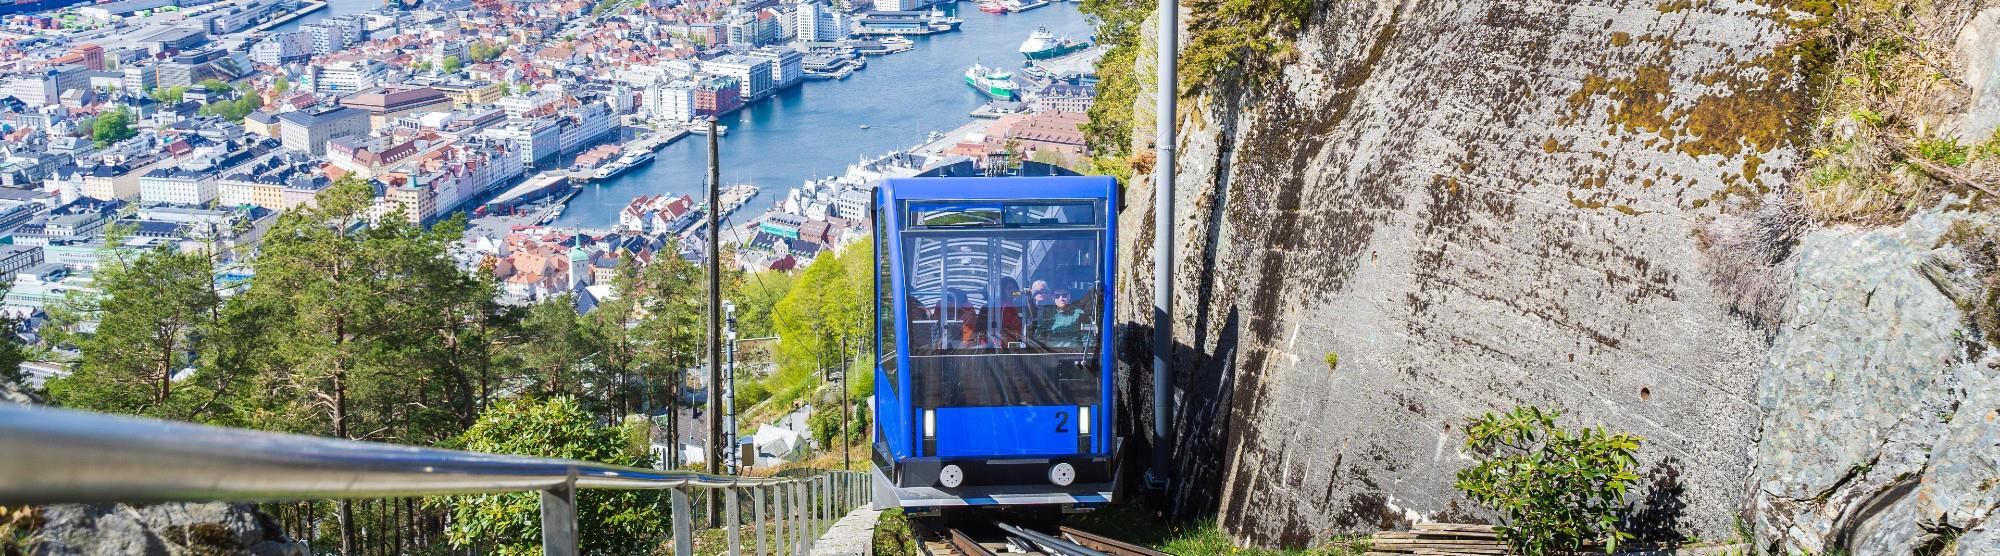 Attractions included in the Bergen Card